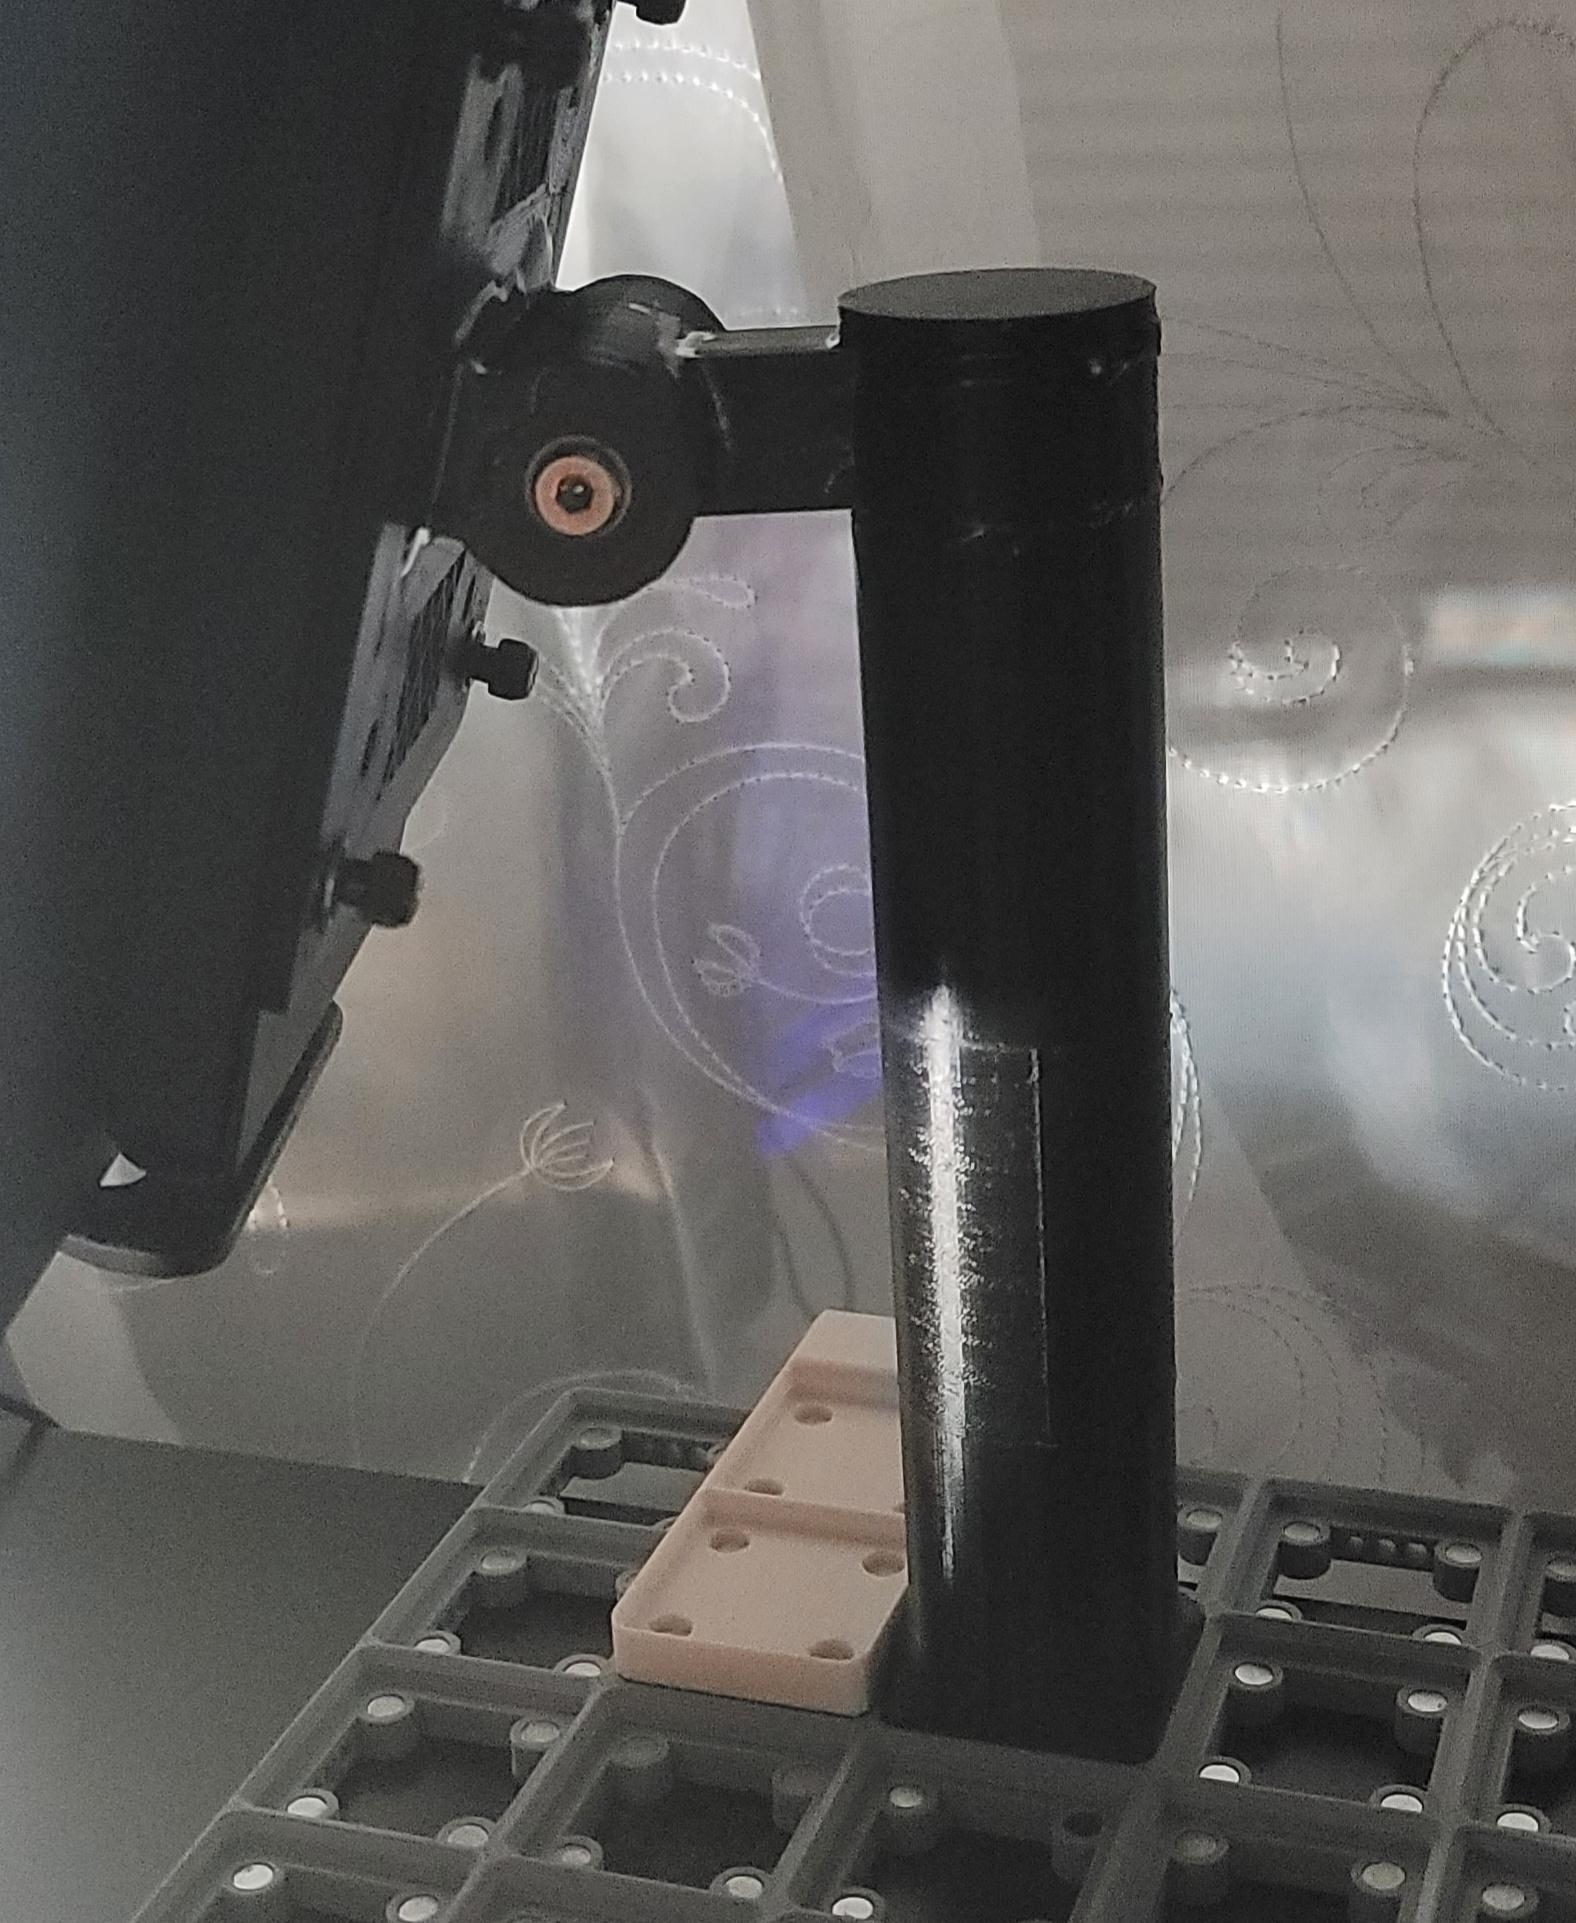 Desk Clamp with Gridfinity Top - 

My pictured remixed models:

VESA monitor stand arm with Gridfinity base (black, bottom piece adapter between VESA stand and gridfinity base)
https://www.thingiverse.com/thing:6328961
https://thangs.com/designer/Unsecured1103/3d-model/VESA%20monitor%20stand%20arm%20with%20Gridfinity%20base-968532?manualModelView=true&source=All+Files

Desk Clamp with Gridfinity Top (beige clamp in back)
https://thangs.com/designer/Unsecured1103/3d-model/Desk%20Clamp%20with%20Gridfinity%20Top-966942
https://www.printables.com/model/655555-desk-clamp-with-gridfinity-top


Other pictured models:

Monitor stand VESA 100x100 and 75x75 Height Adjustable
https://www.thingiverse.com/thing:4973175

Gridfinity Screw Together baseplate (gray)
https://www.printables.com/model/300603-gridfinity-screw-together-baseplate
5x5 version
 - 3d model